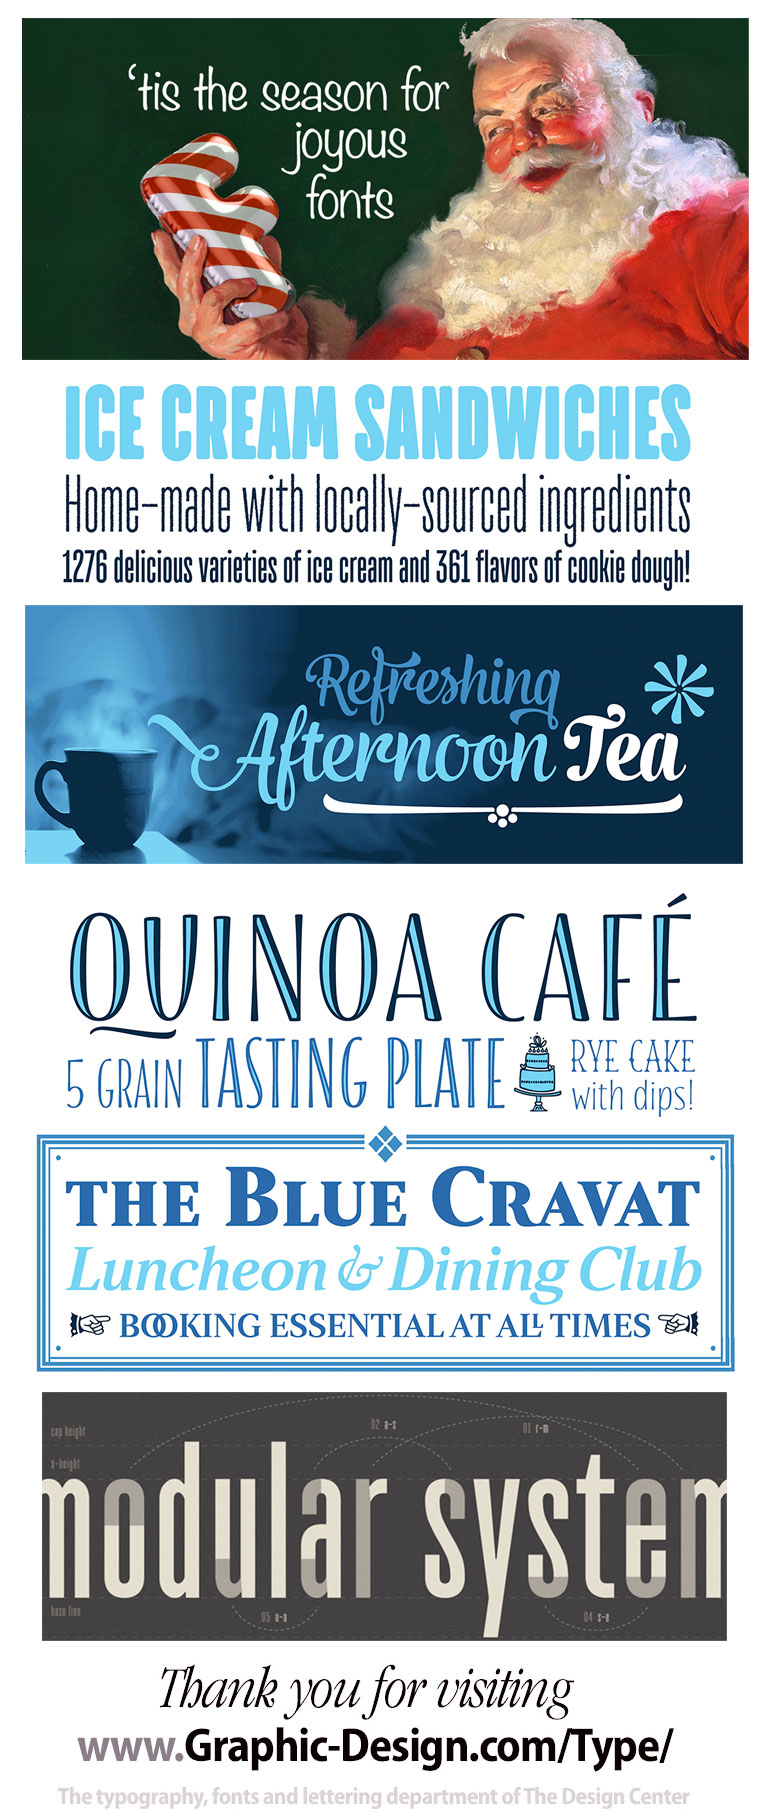 click here to see an enlargement of our December fonts poster